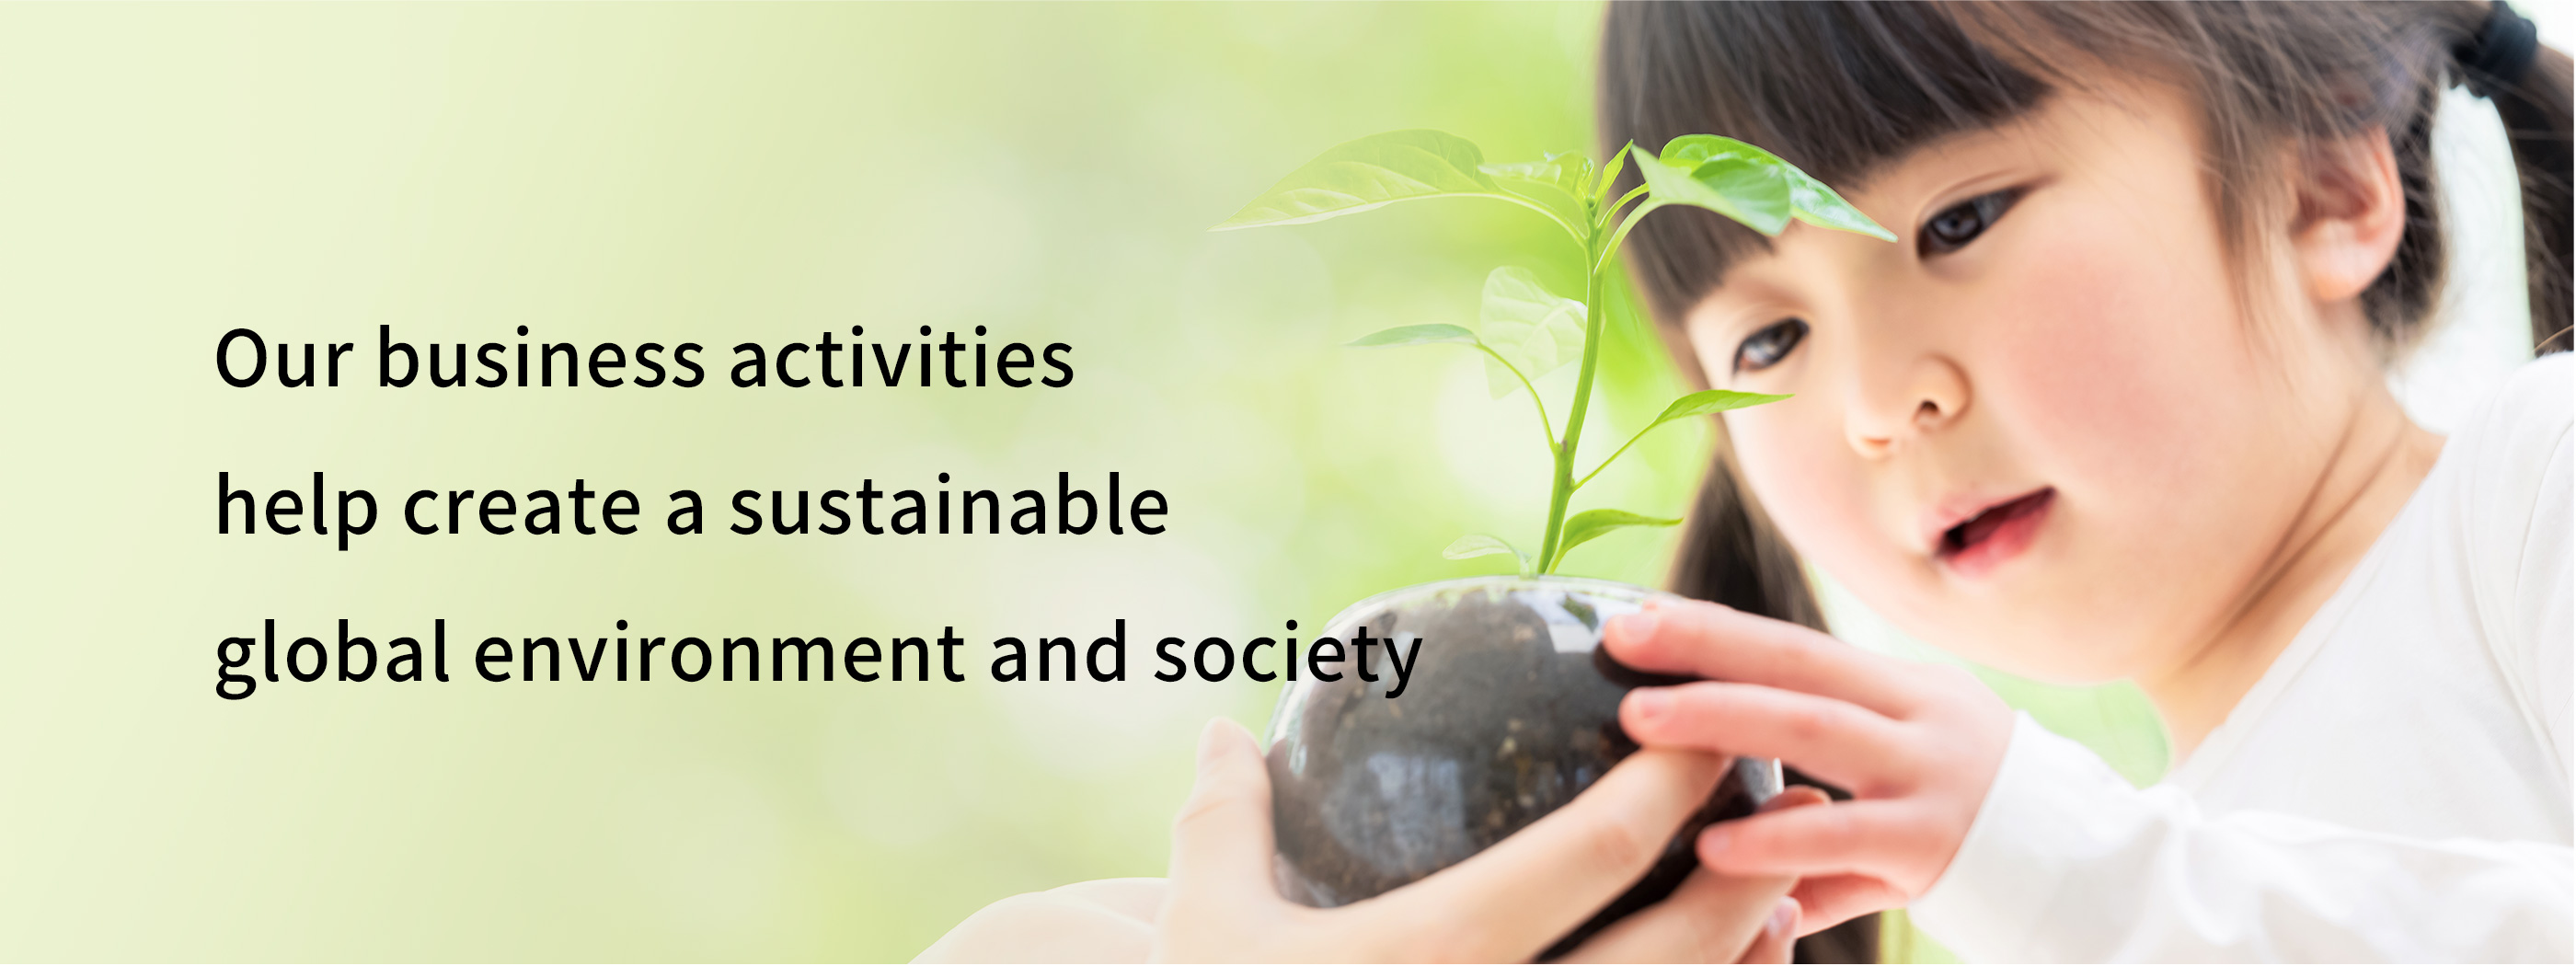 Our business activities help create a sustainable global environment and society